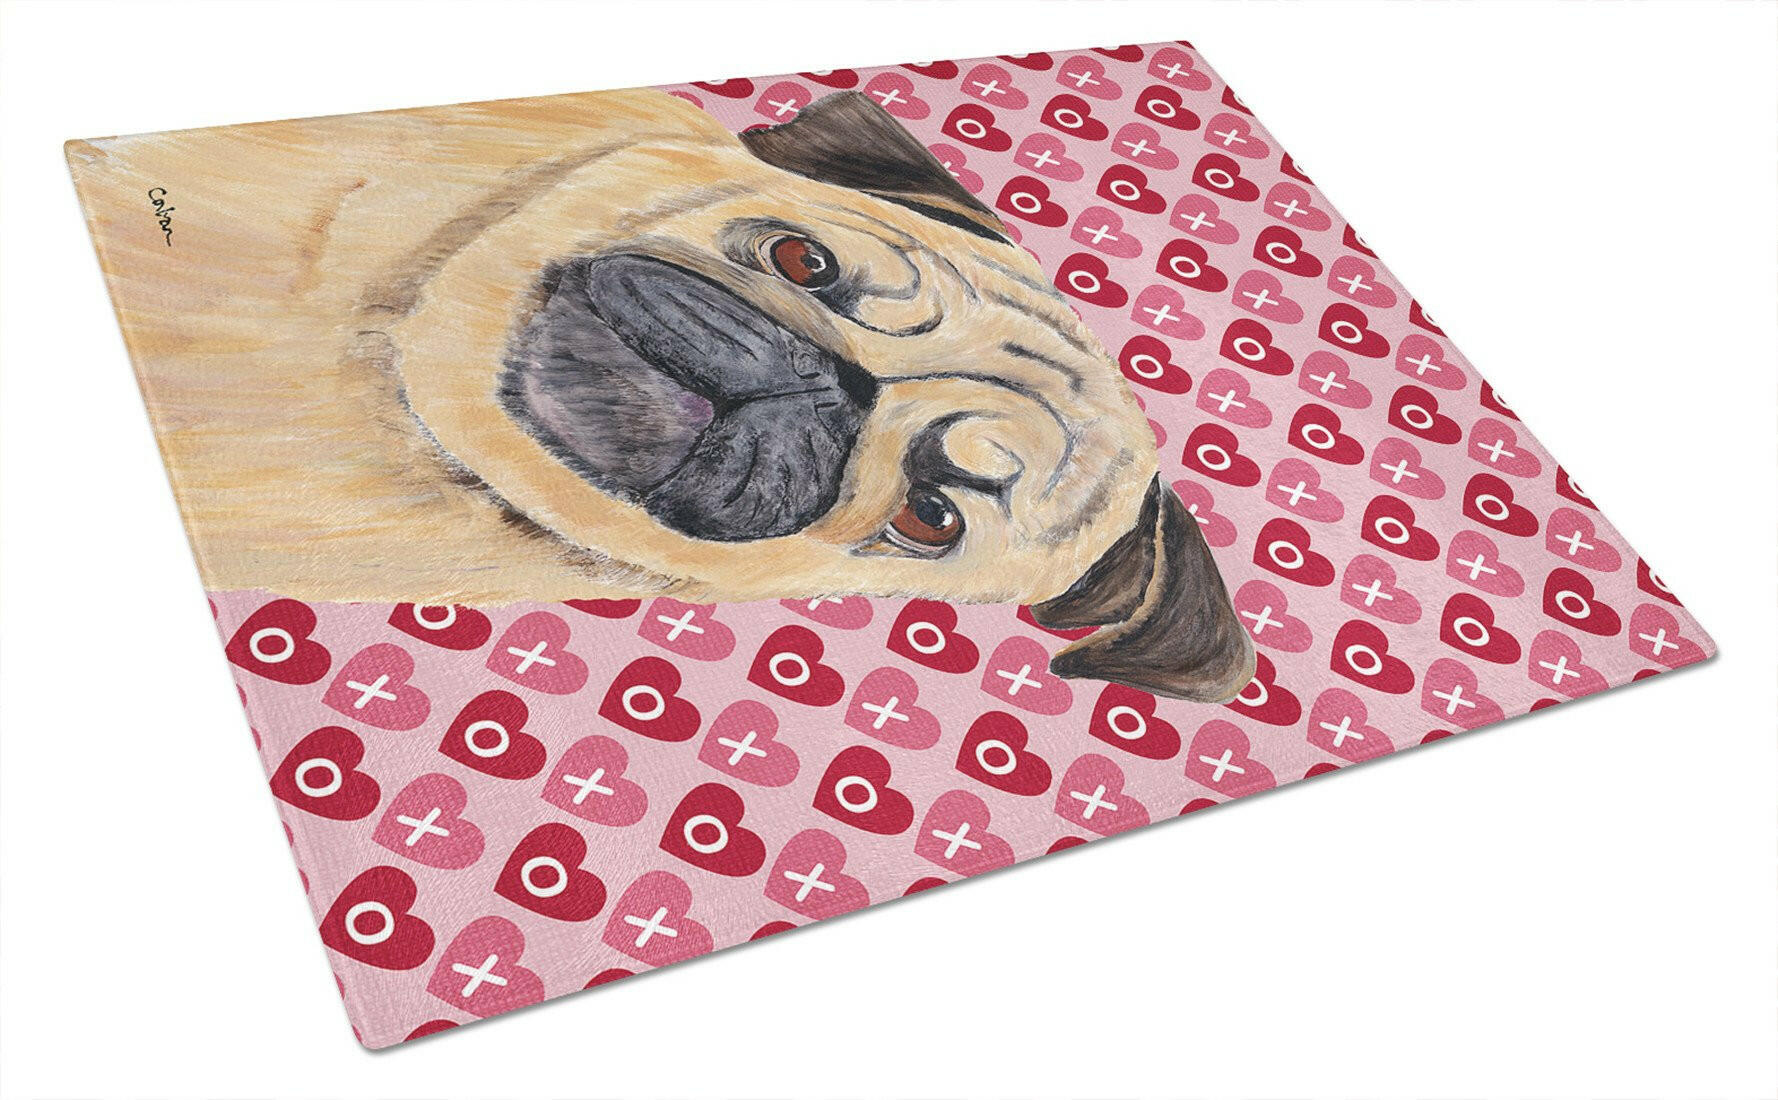 Pug Hearts Love and Valentine's Day Portrait Glass Cutting Board Large by Caroline's Treasures